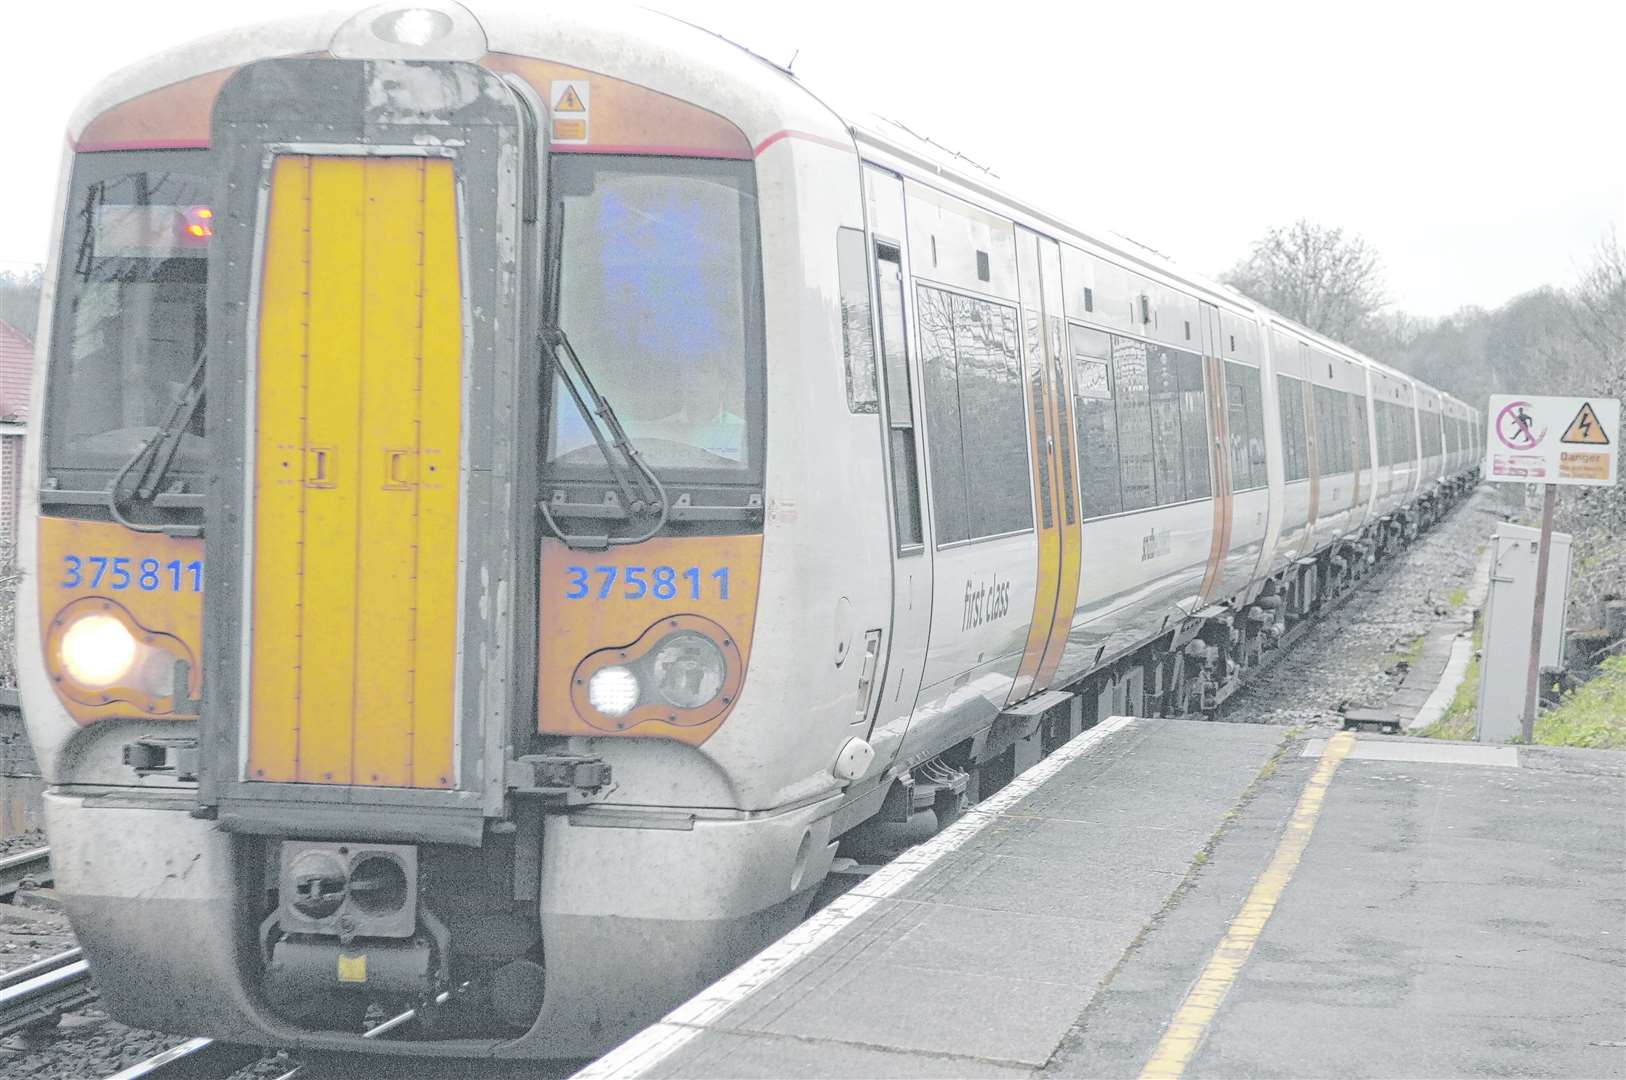 Southeastern say services are back to normal (7030692)